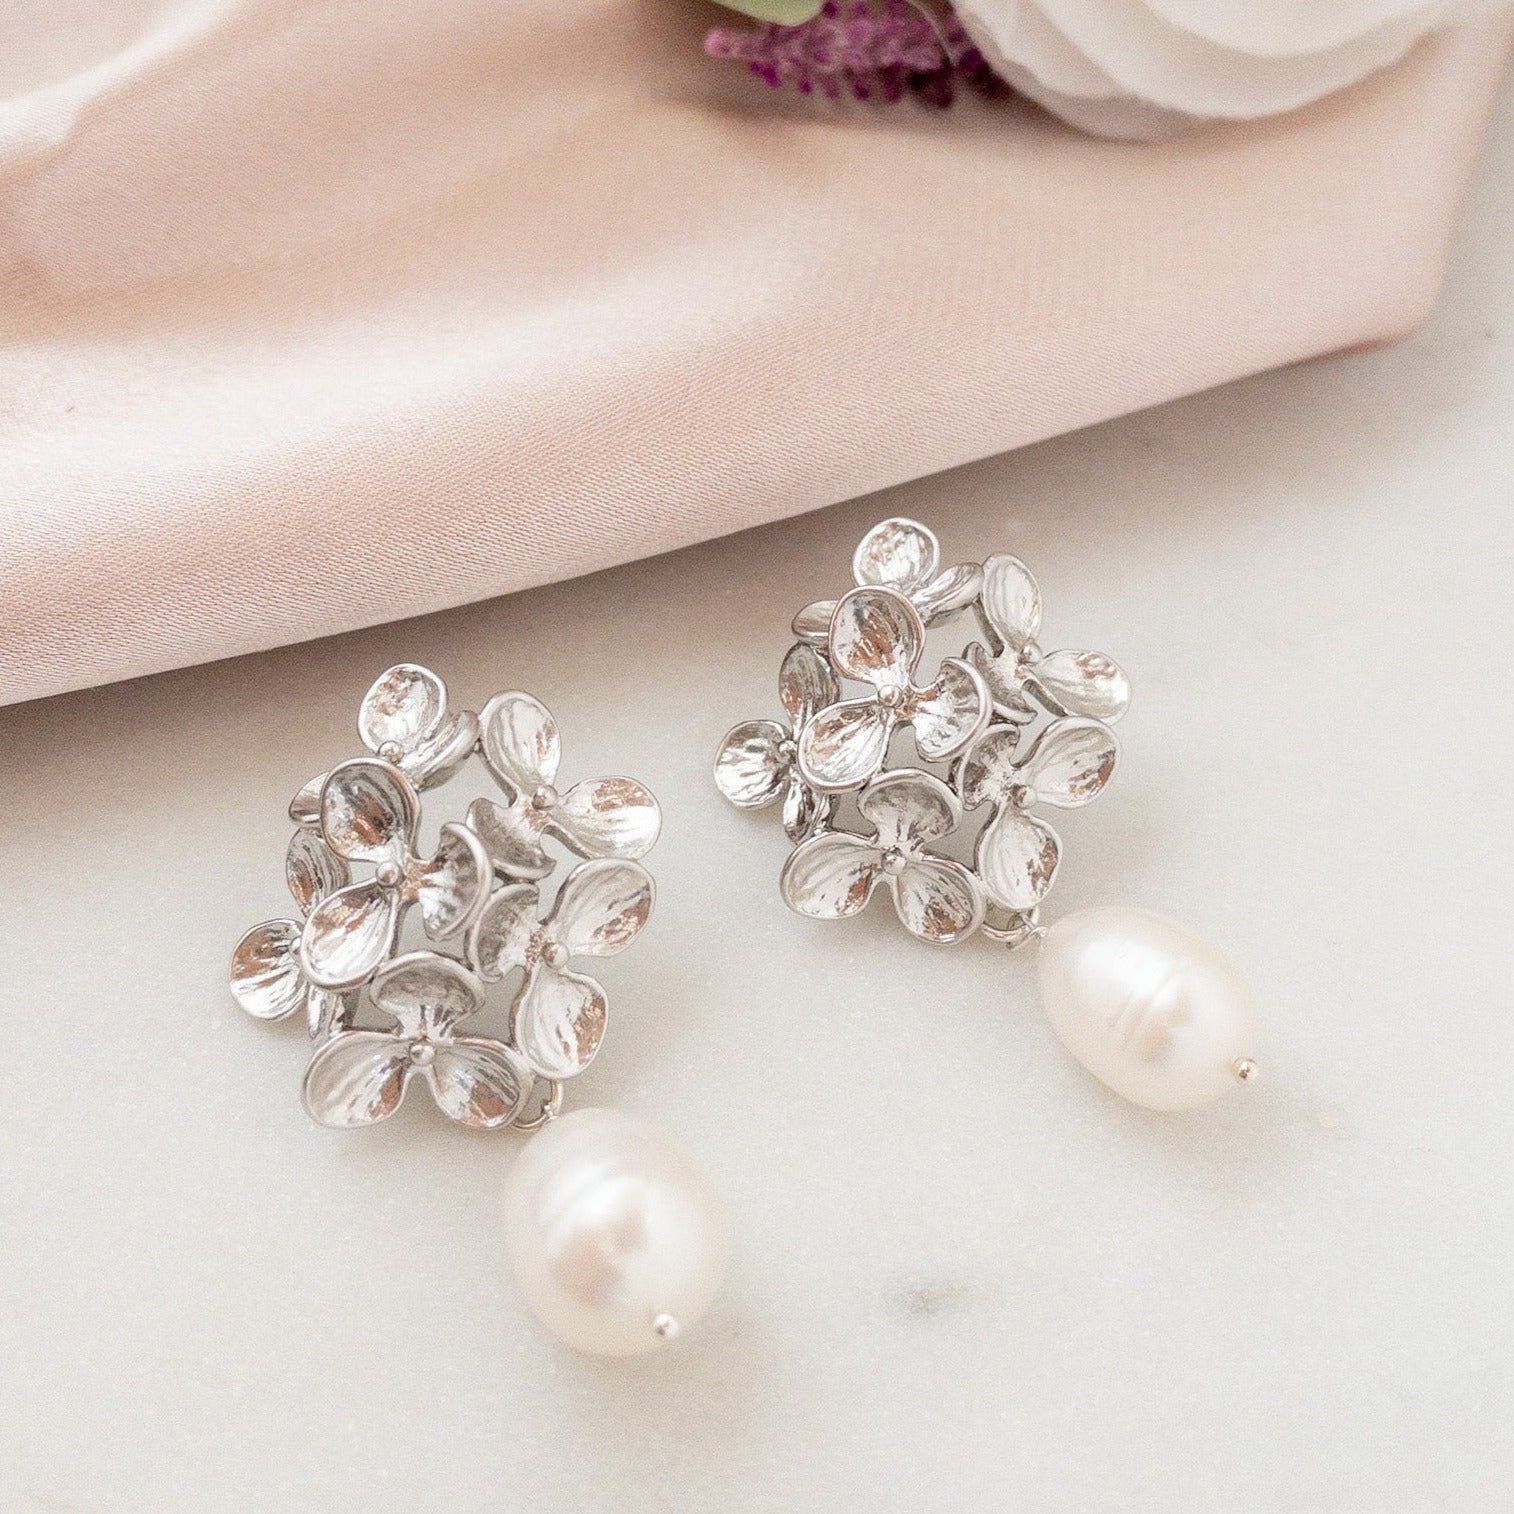 Silver floral earrings with freshwater pearls